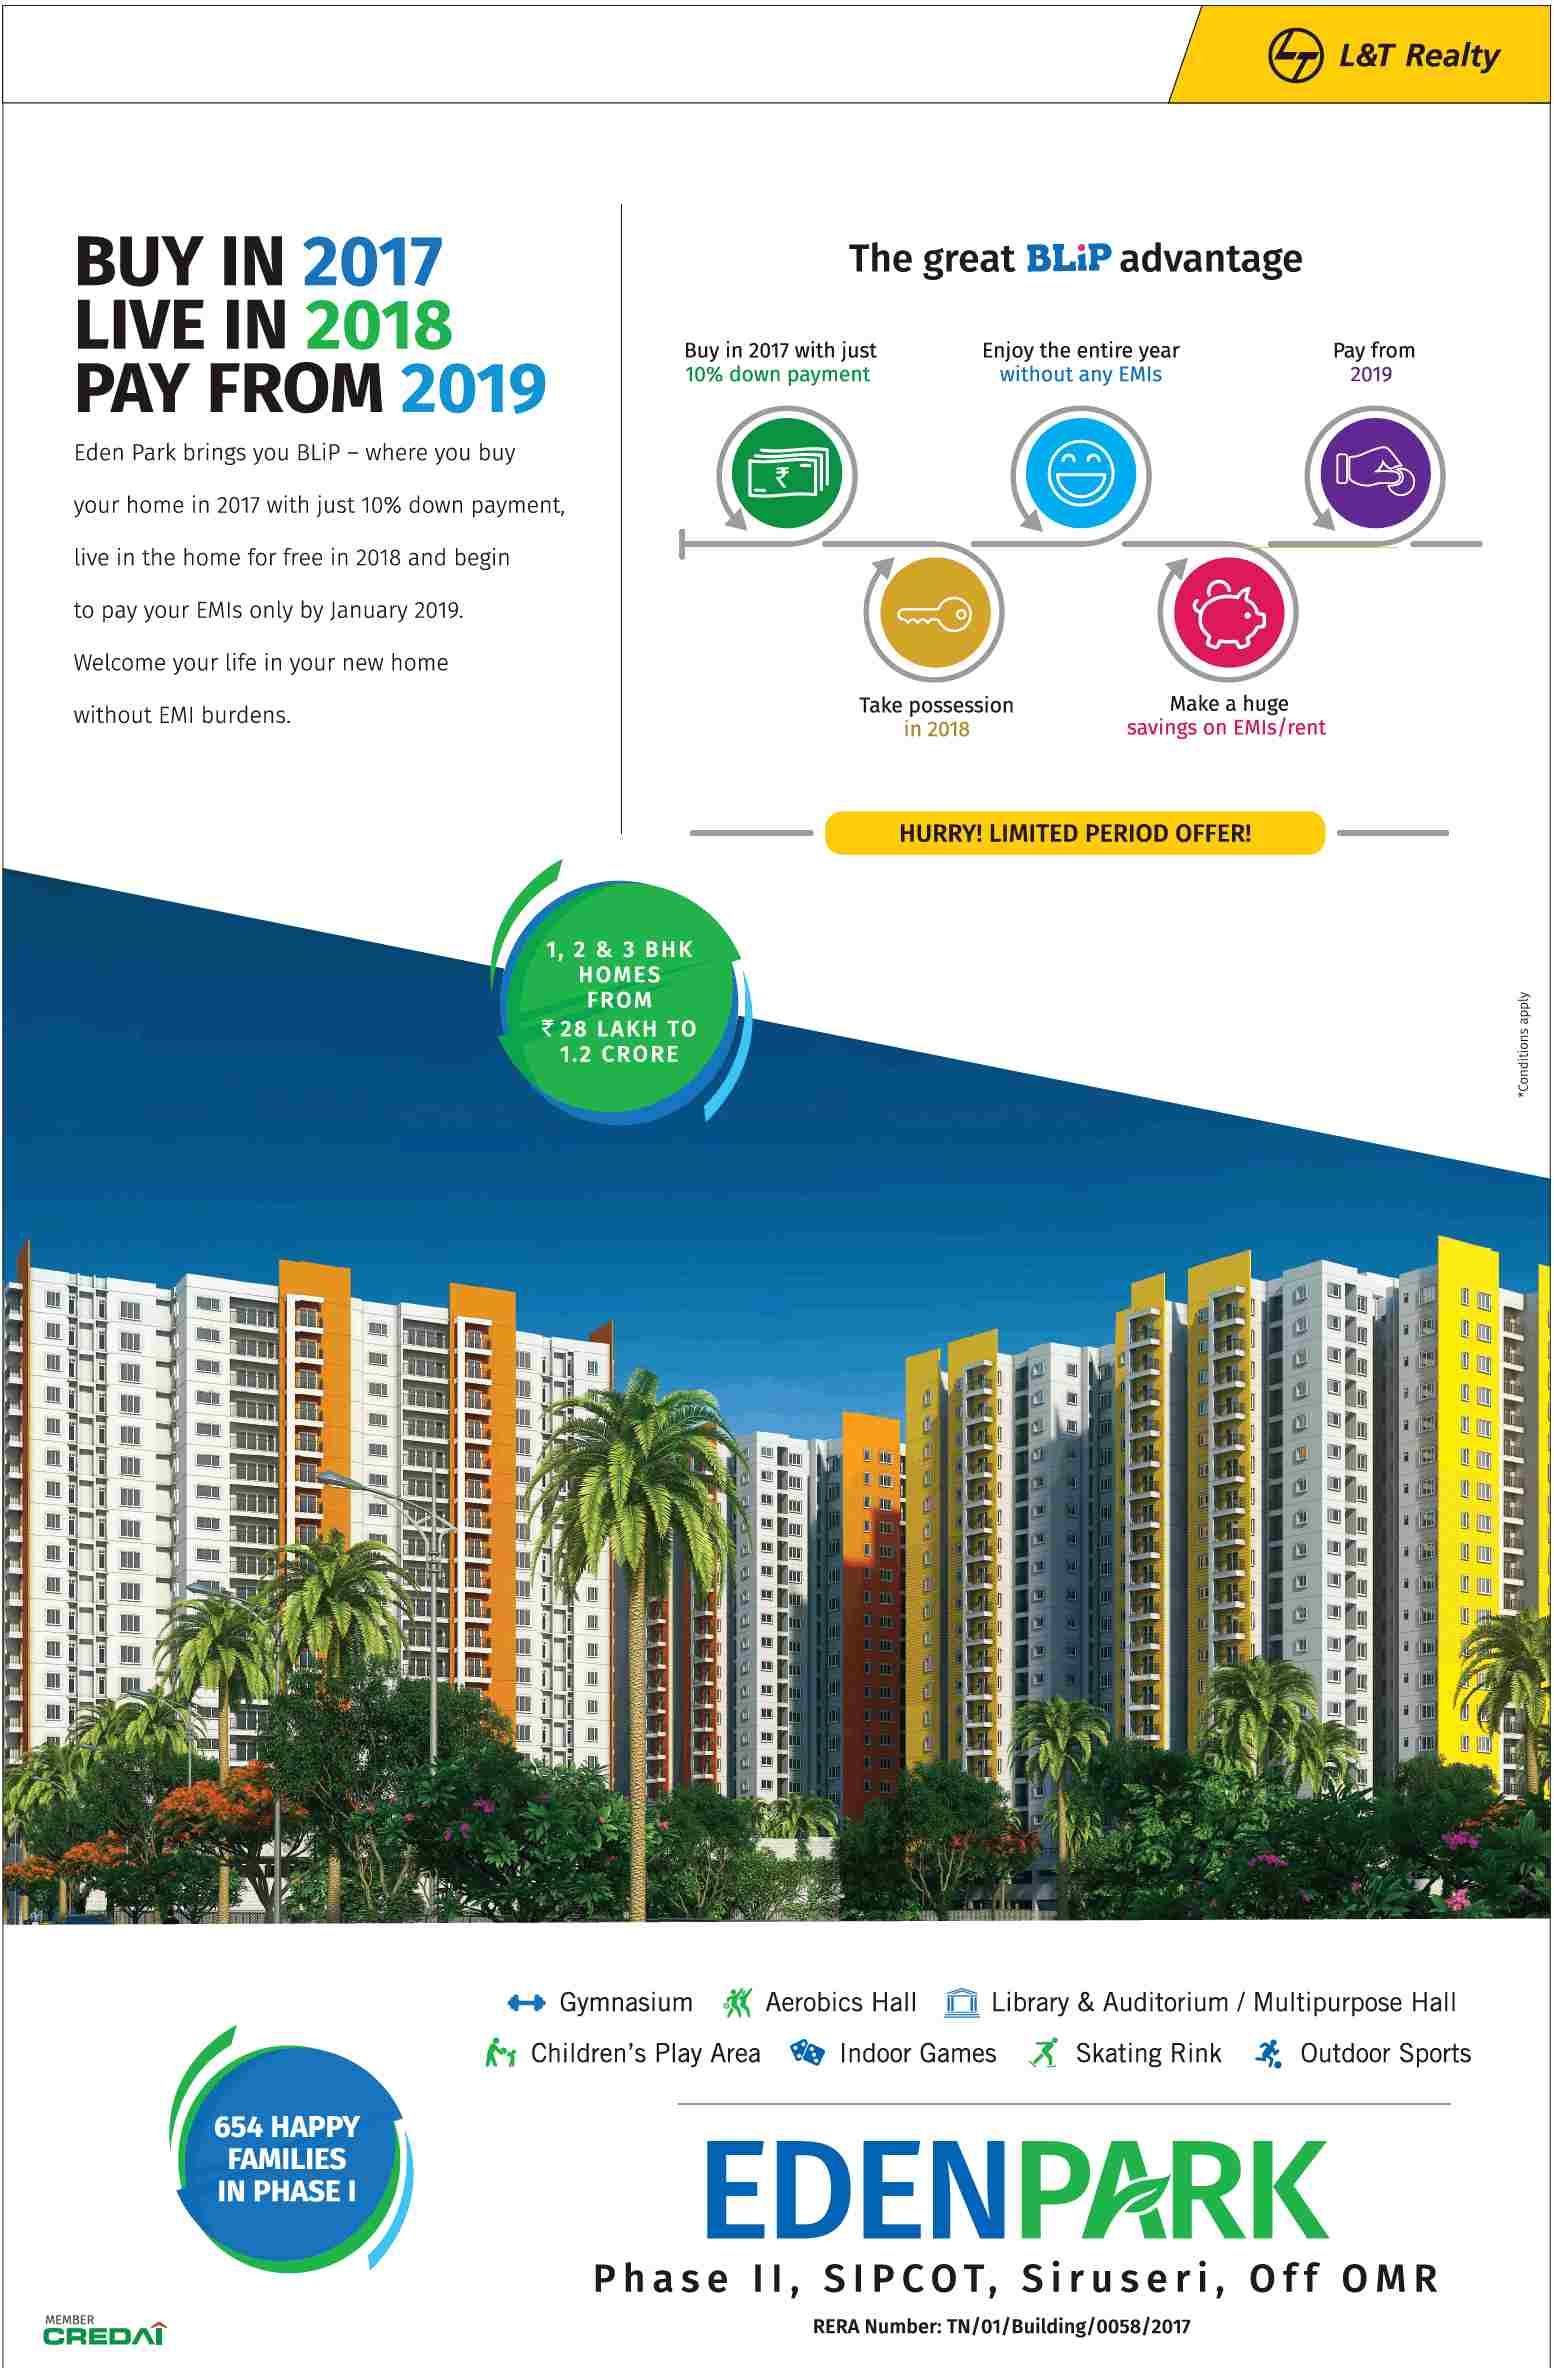 Avail The great BLIP advantage at L And T Eden Park in  Chennai Update